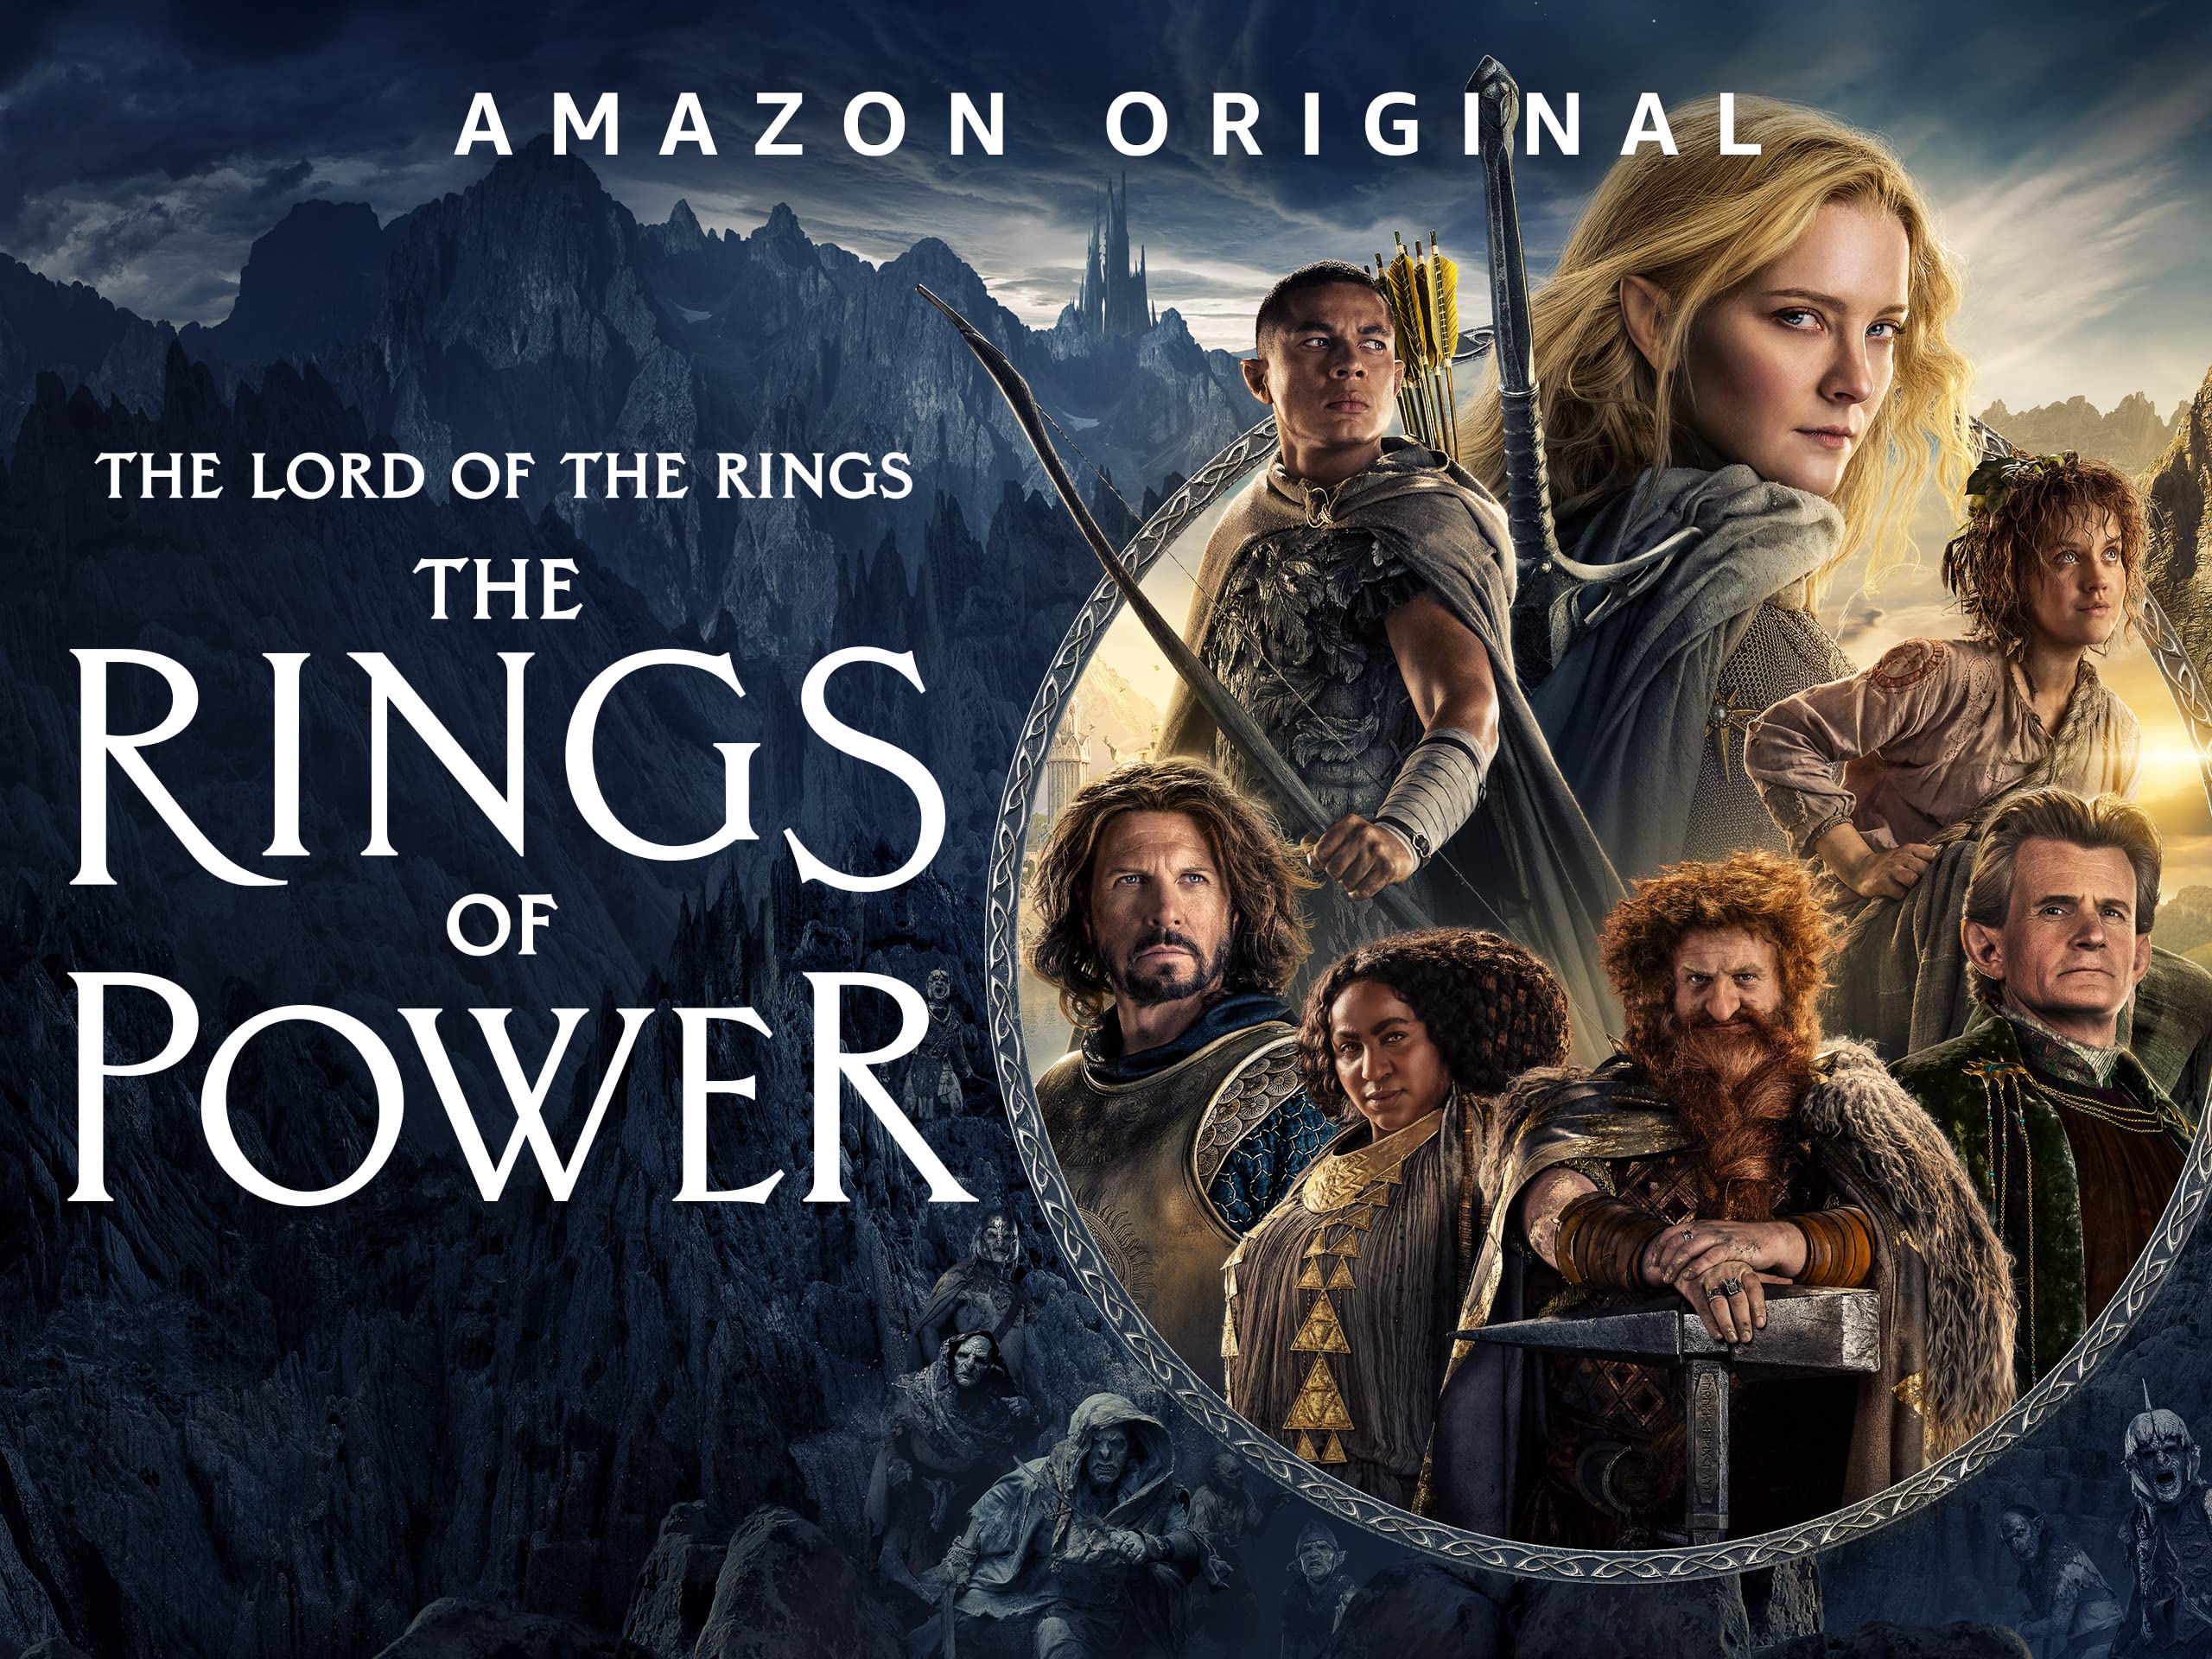 The Lord of the Rings: The Rings of Power TV Poster (#62 of 69) - IMP Awards